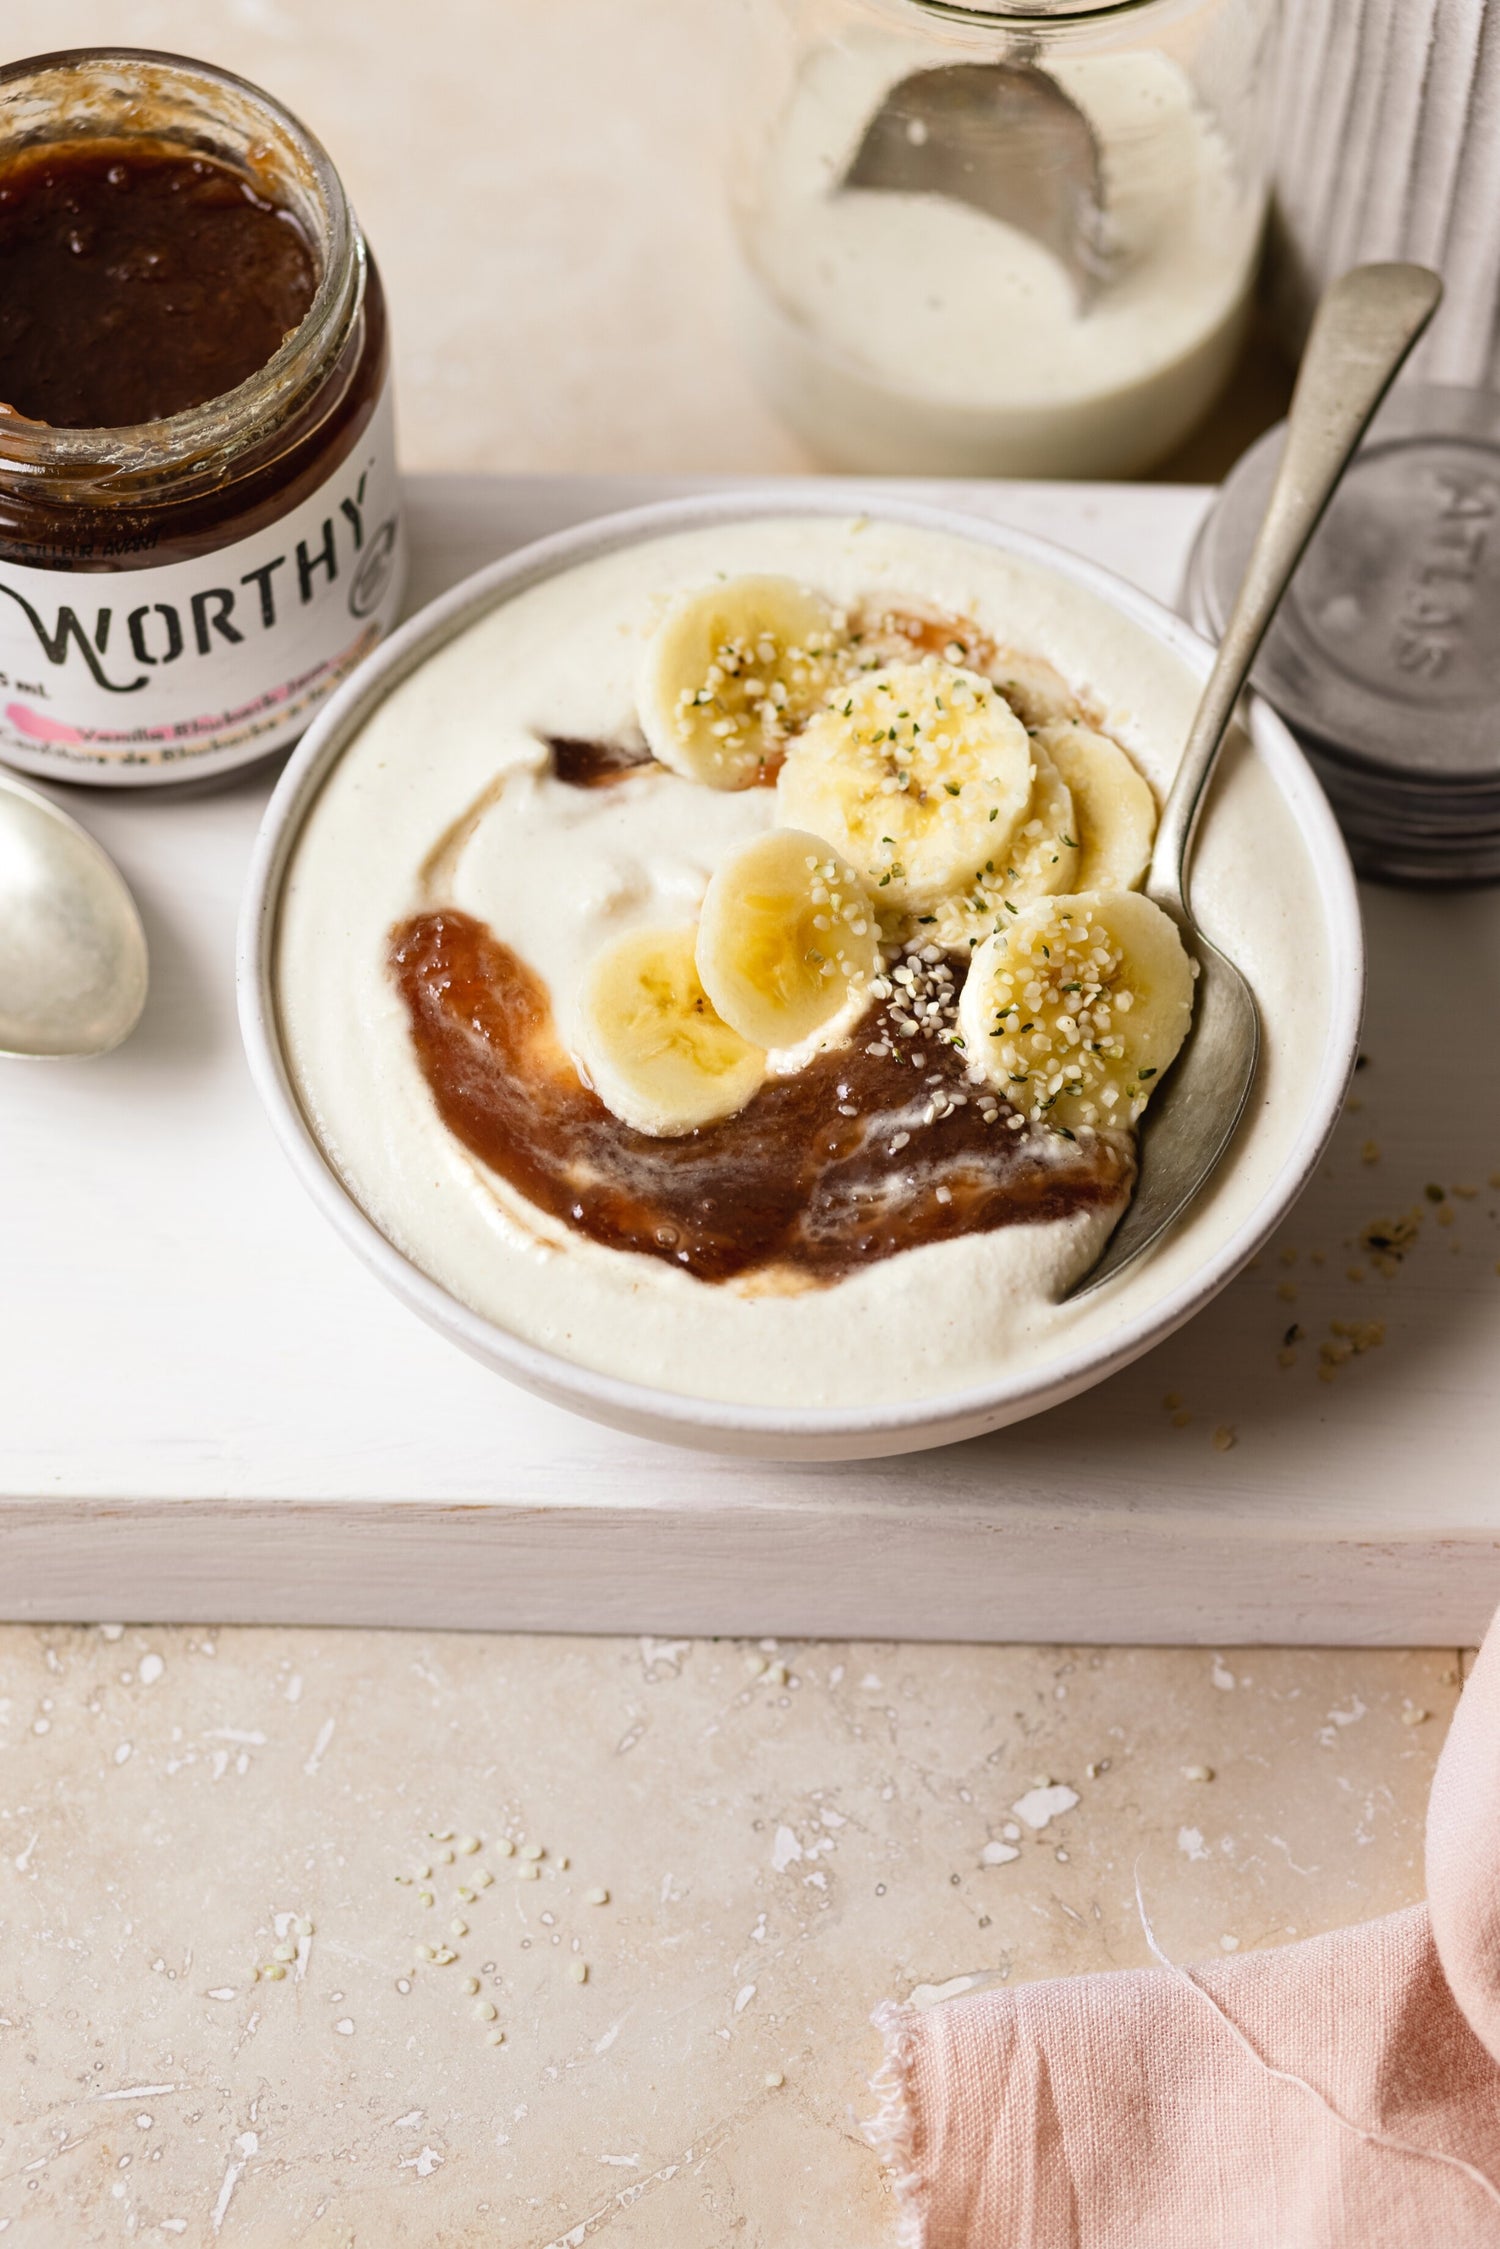 Bowl of blended cashews topped with Worthy’s Vanilla Rhubarb jam, slices of banana and hemp hearts.